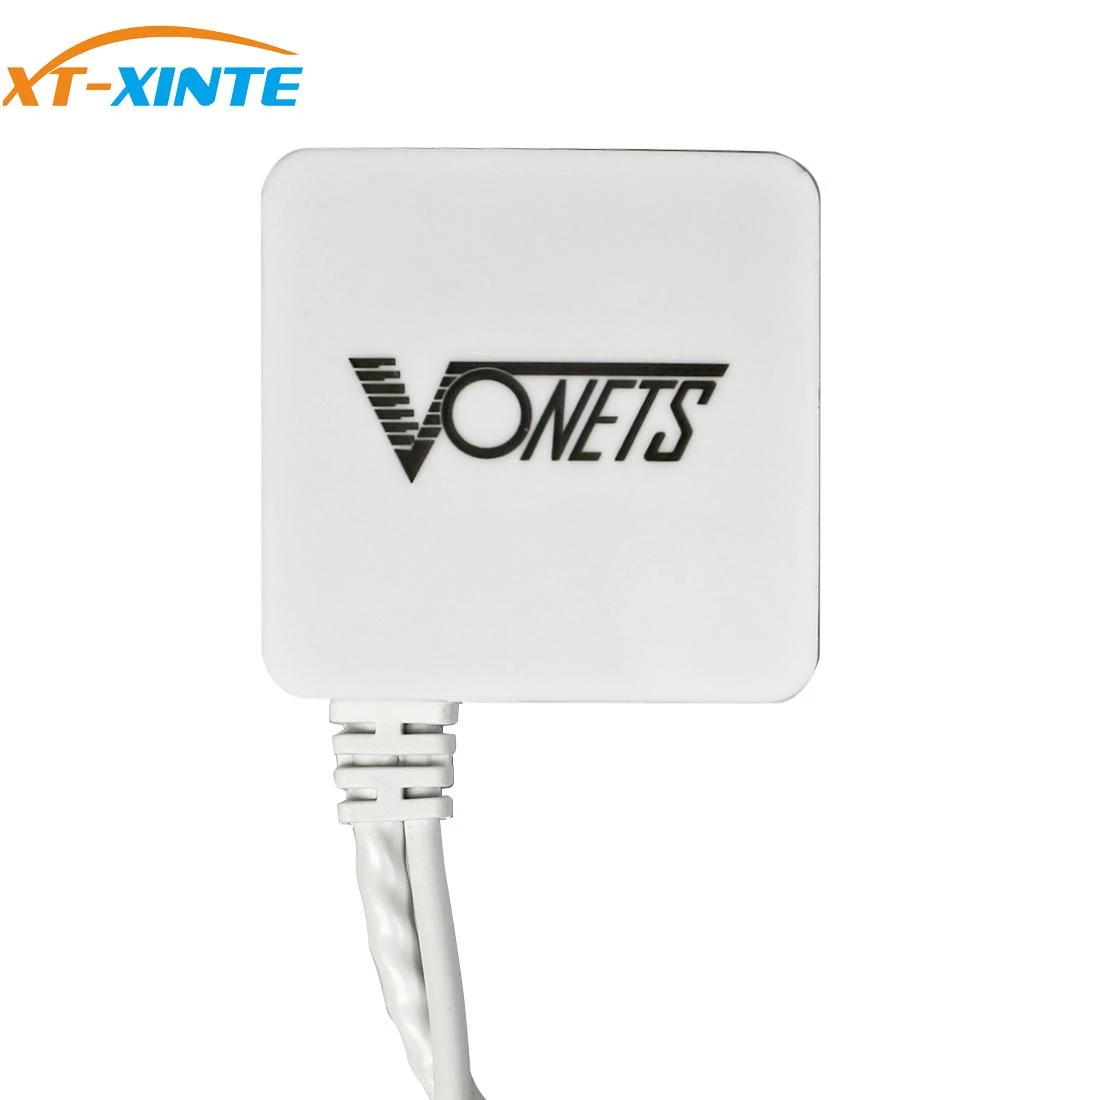 VAR11N-300 MINI WiFi Wireless Networking Router & Bridge Router Wifi Repeater 300Mbps Wifi Signal Stable